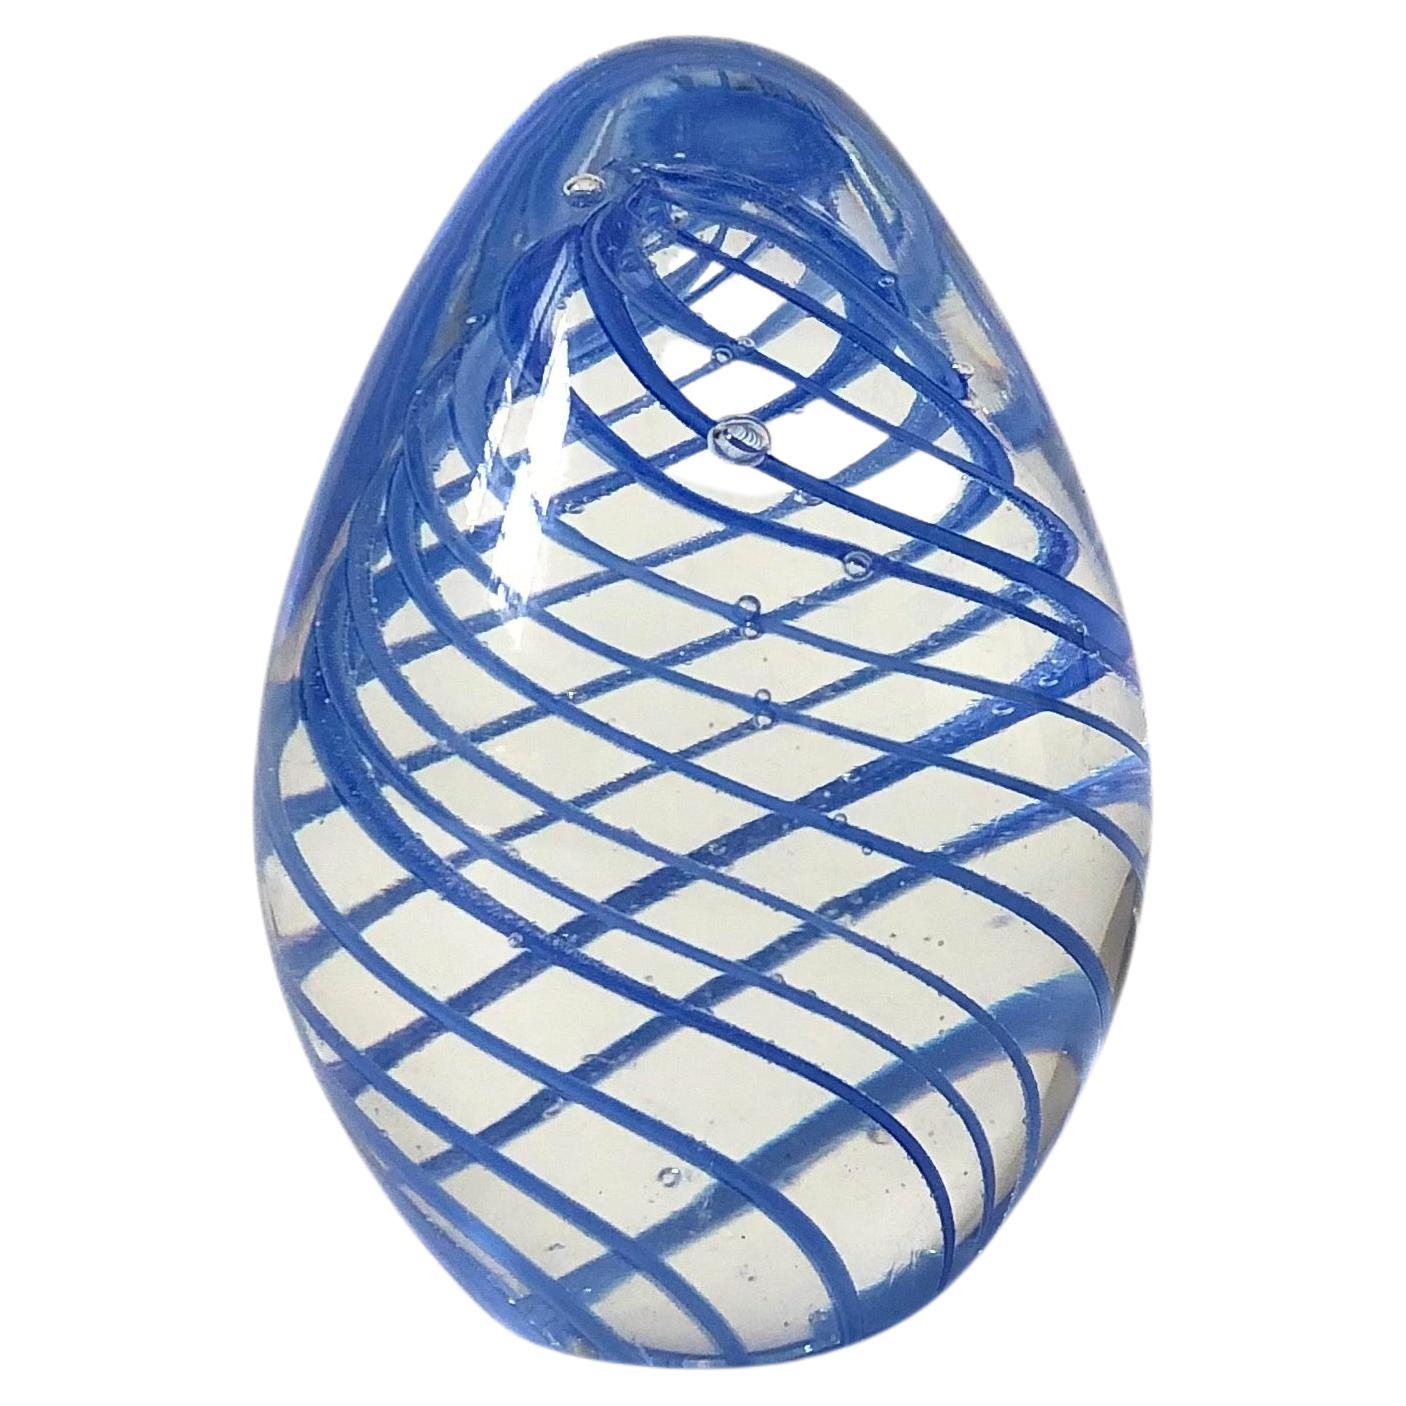 Vintage Periwinkle Swirl Art Glass Egg Paperweight